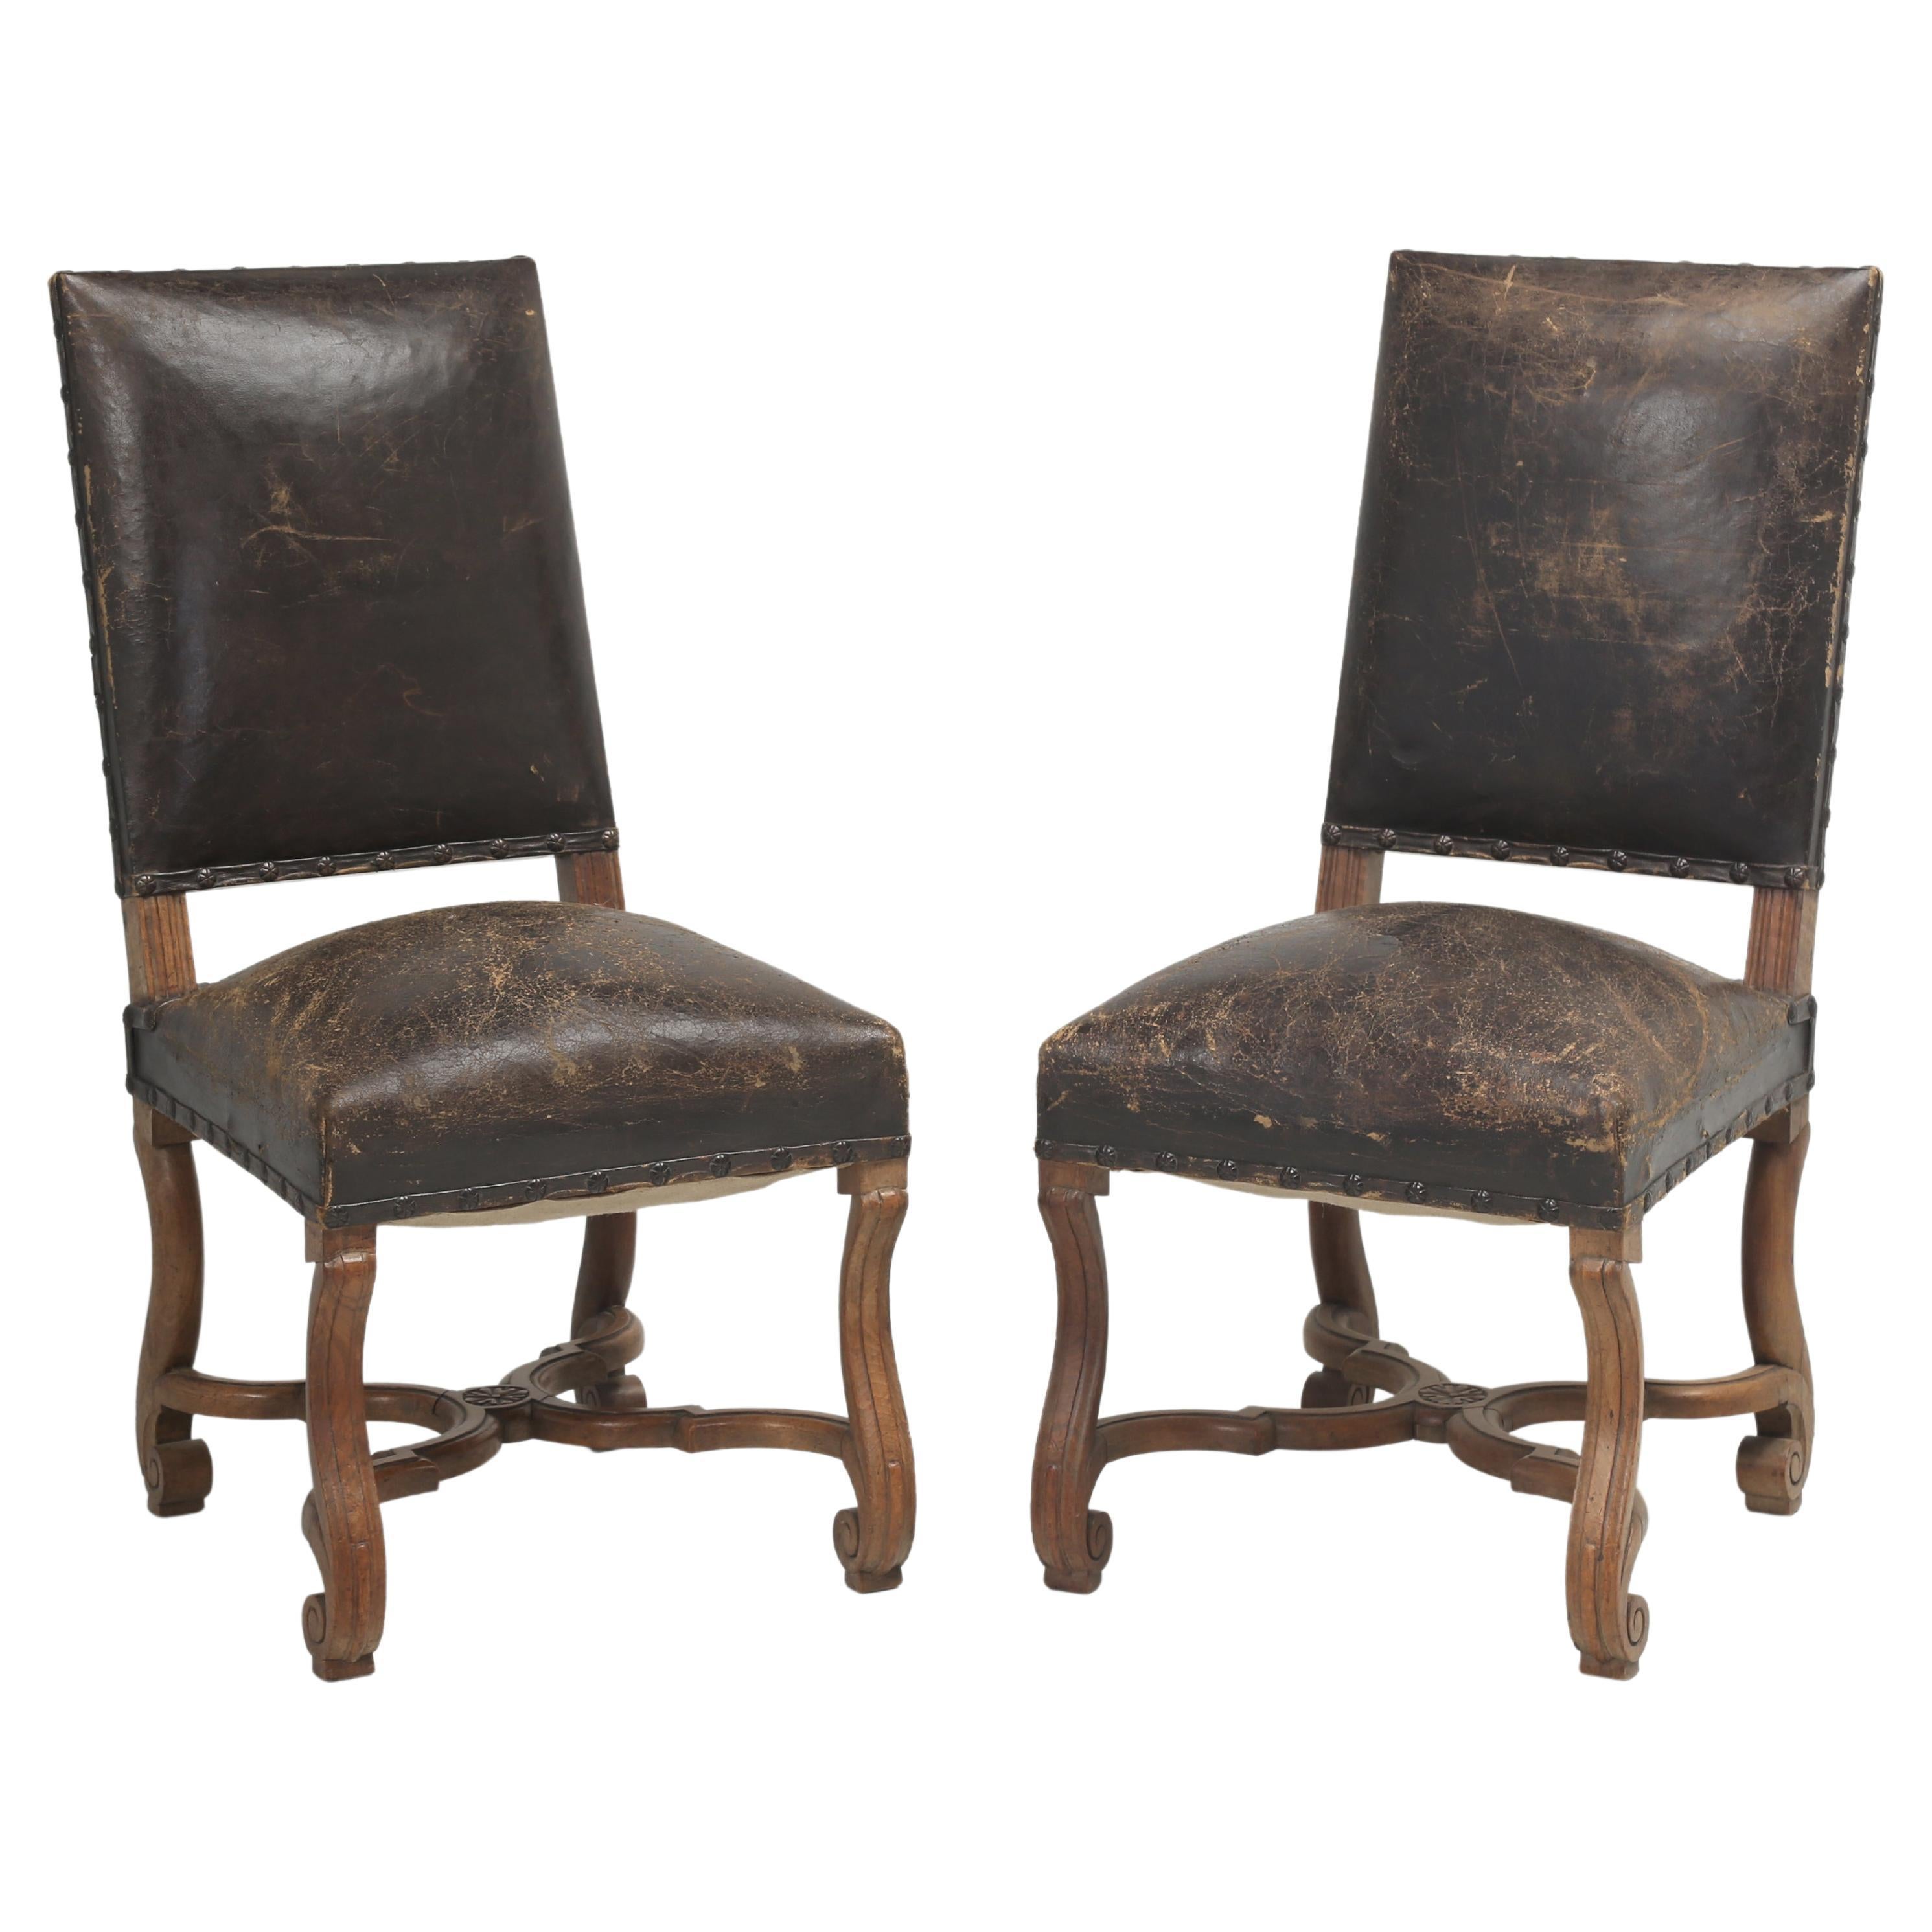 Pair of Antique Old Leather Side Chairs Probably Italian Early 1900s Unrestored For Sale